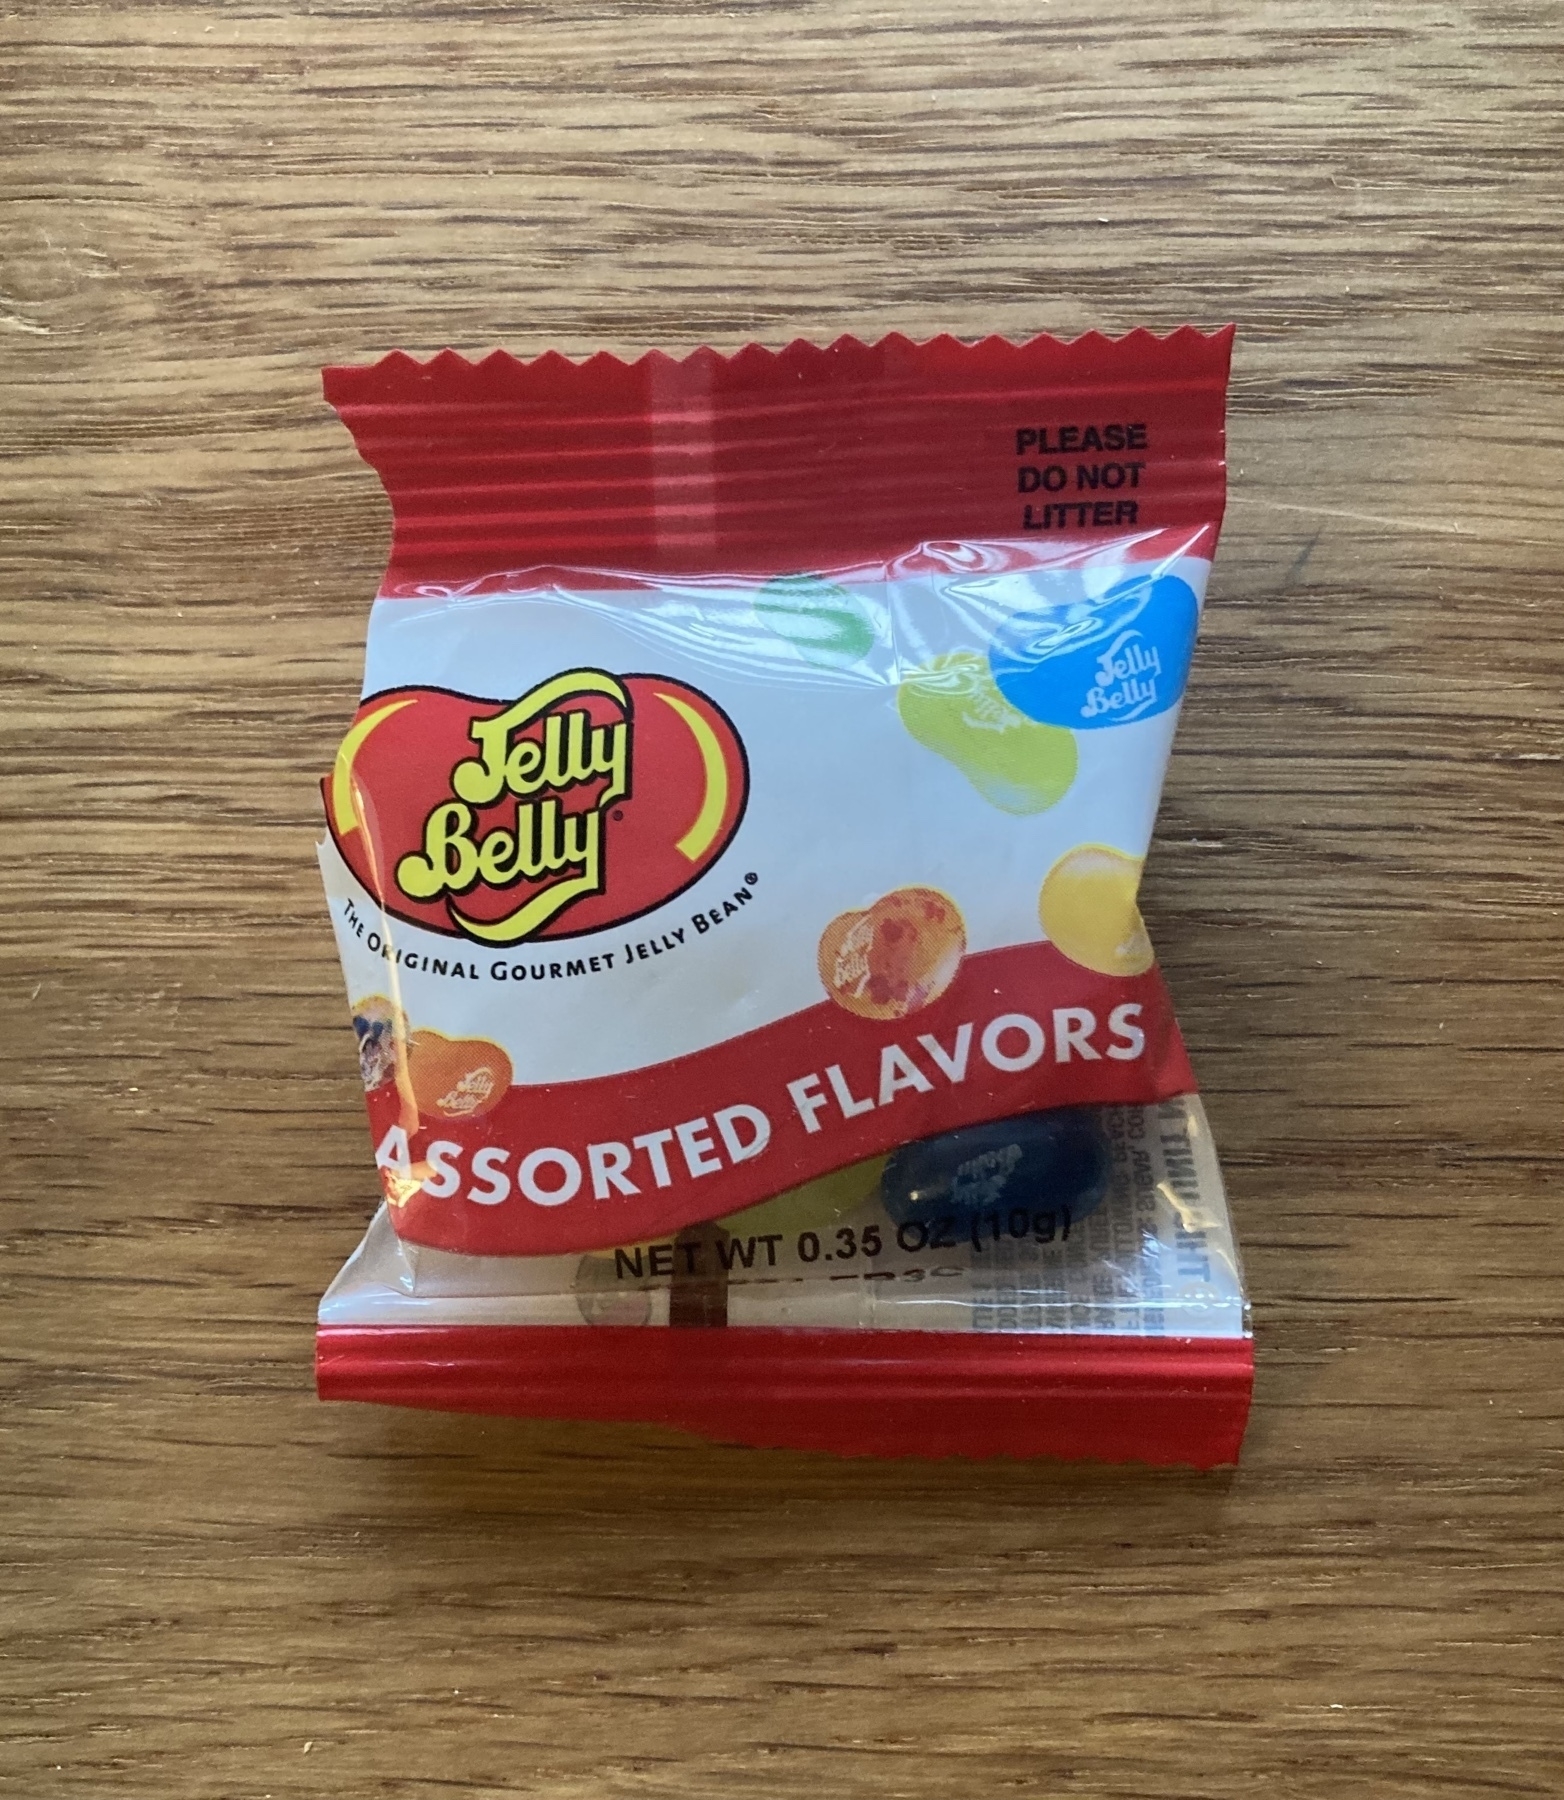 a small packet of assorted flavor Jelly Belly brand jellybeans